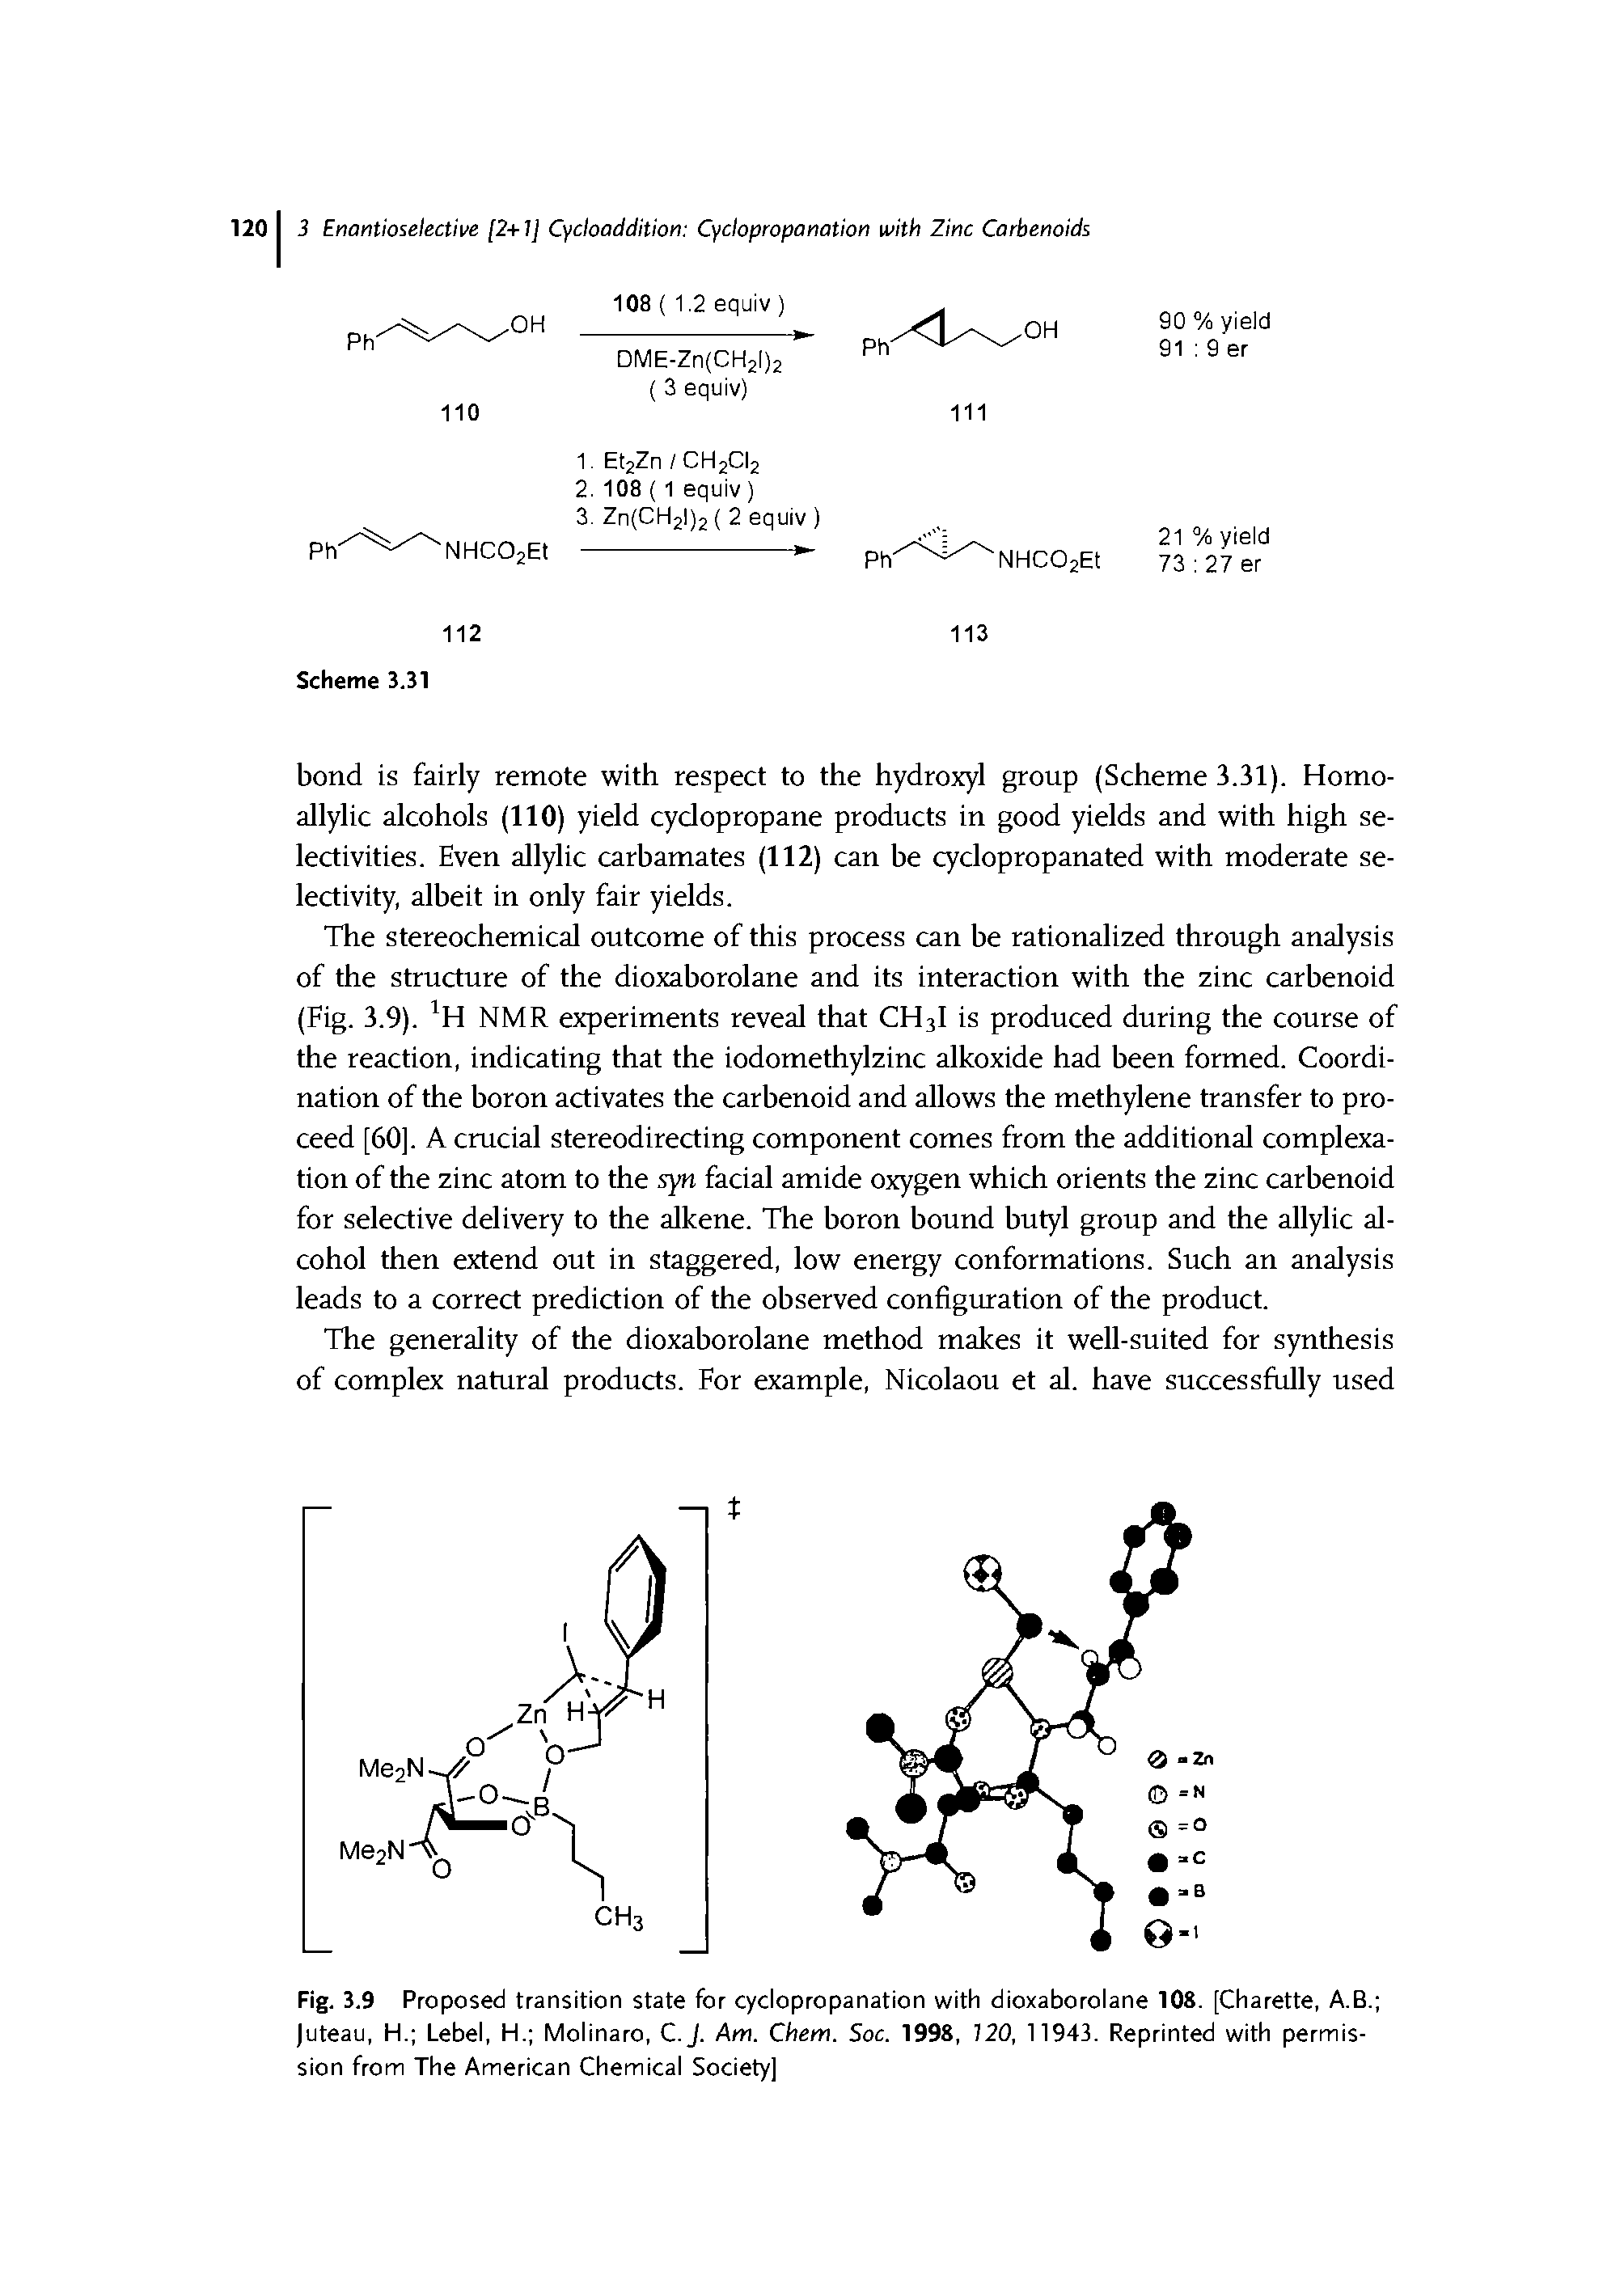 Fig. 3.9 Proposed transition state for cyclopropanation with dioxahorolane 108. [Charette, A.B. juteau, H. Lebel, H. Molinaro, C.J. Am. Chem. Soc. 1998, 120, 11943. Reprinted with permission from The American Chemical Society]...